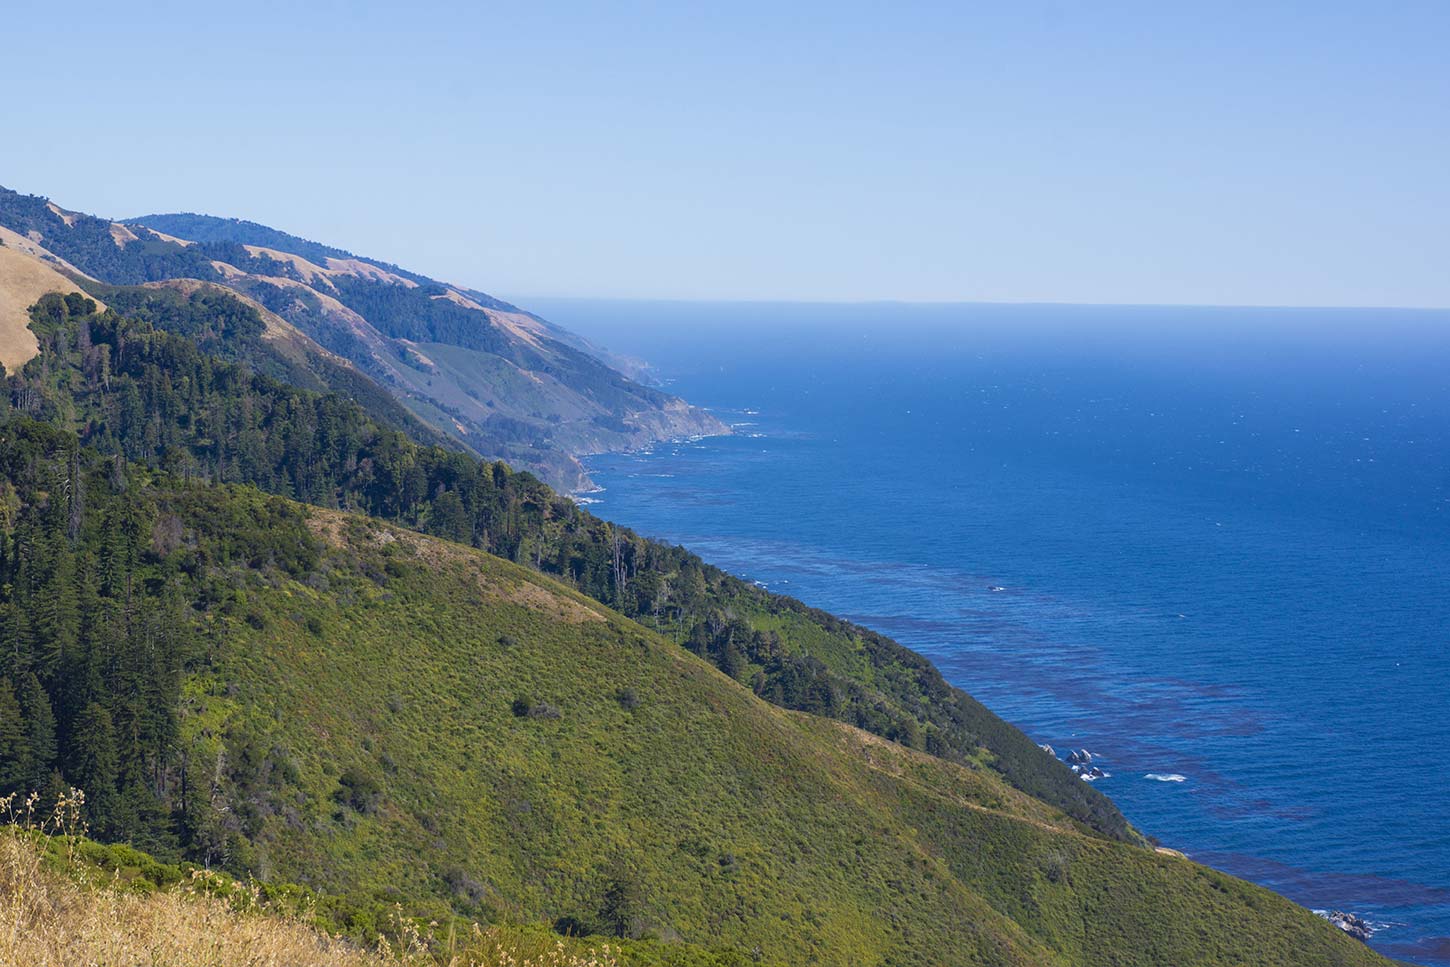 View from the top of the Ewoldsen Trail in Julia Pfeiffer Burns State Park, Big Sur